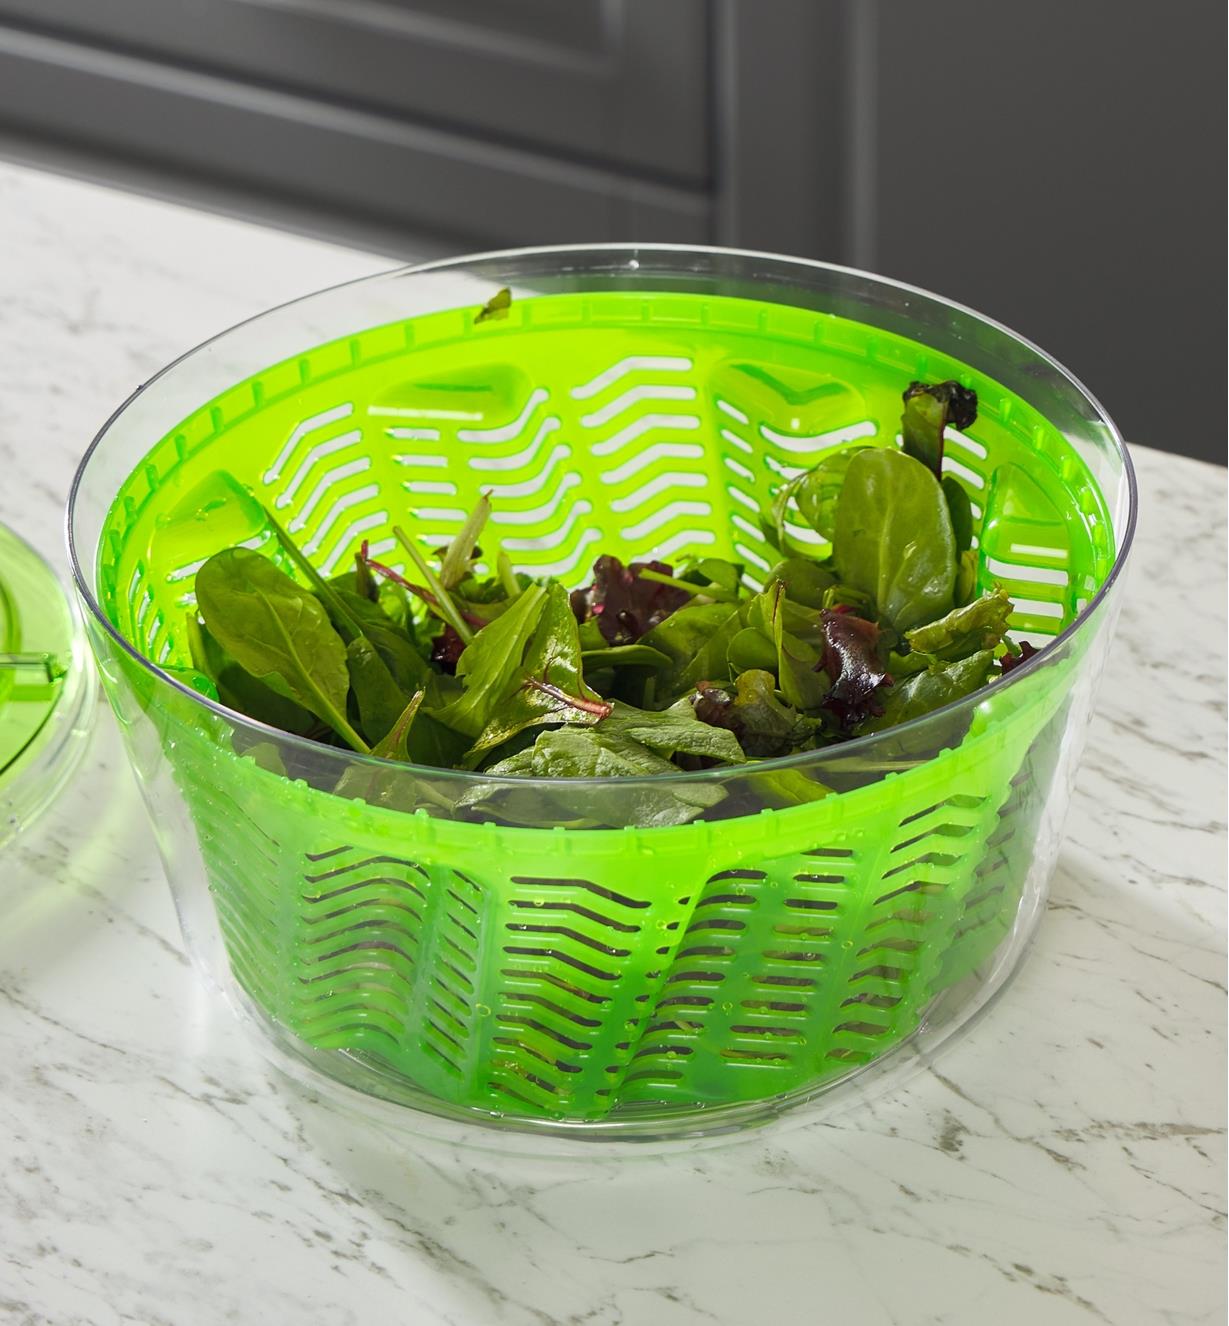 A salad spinner full of lettuce with the lid off